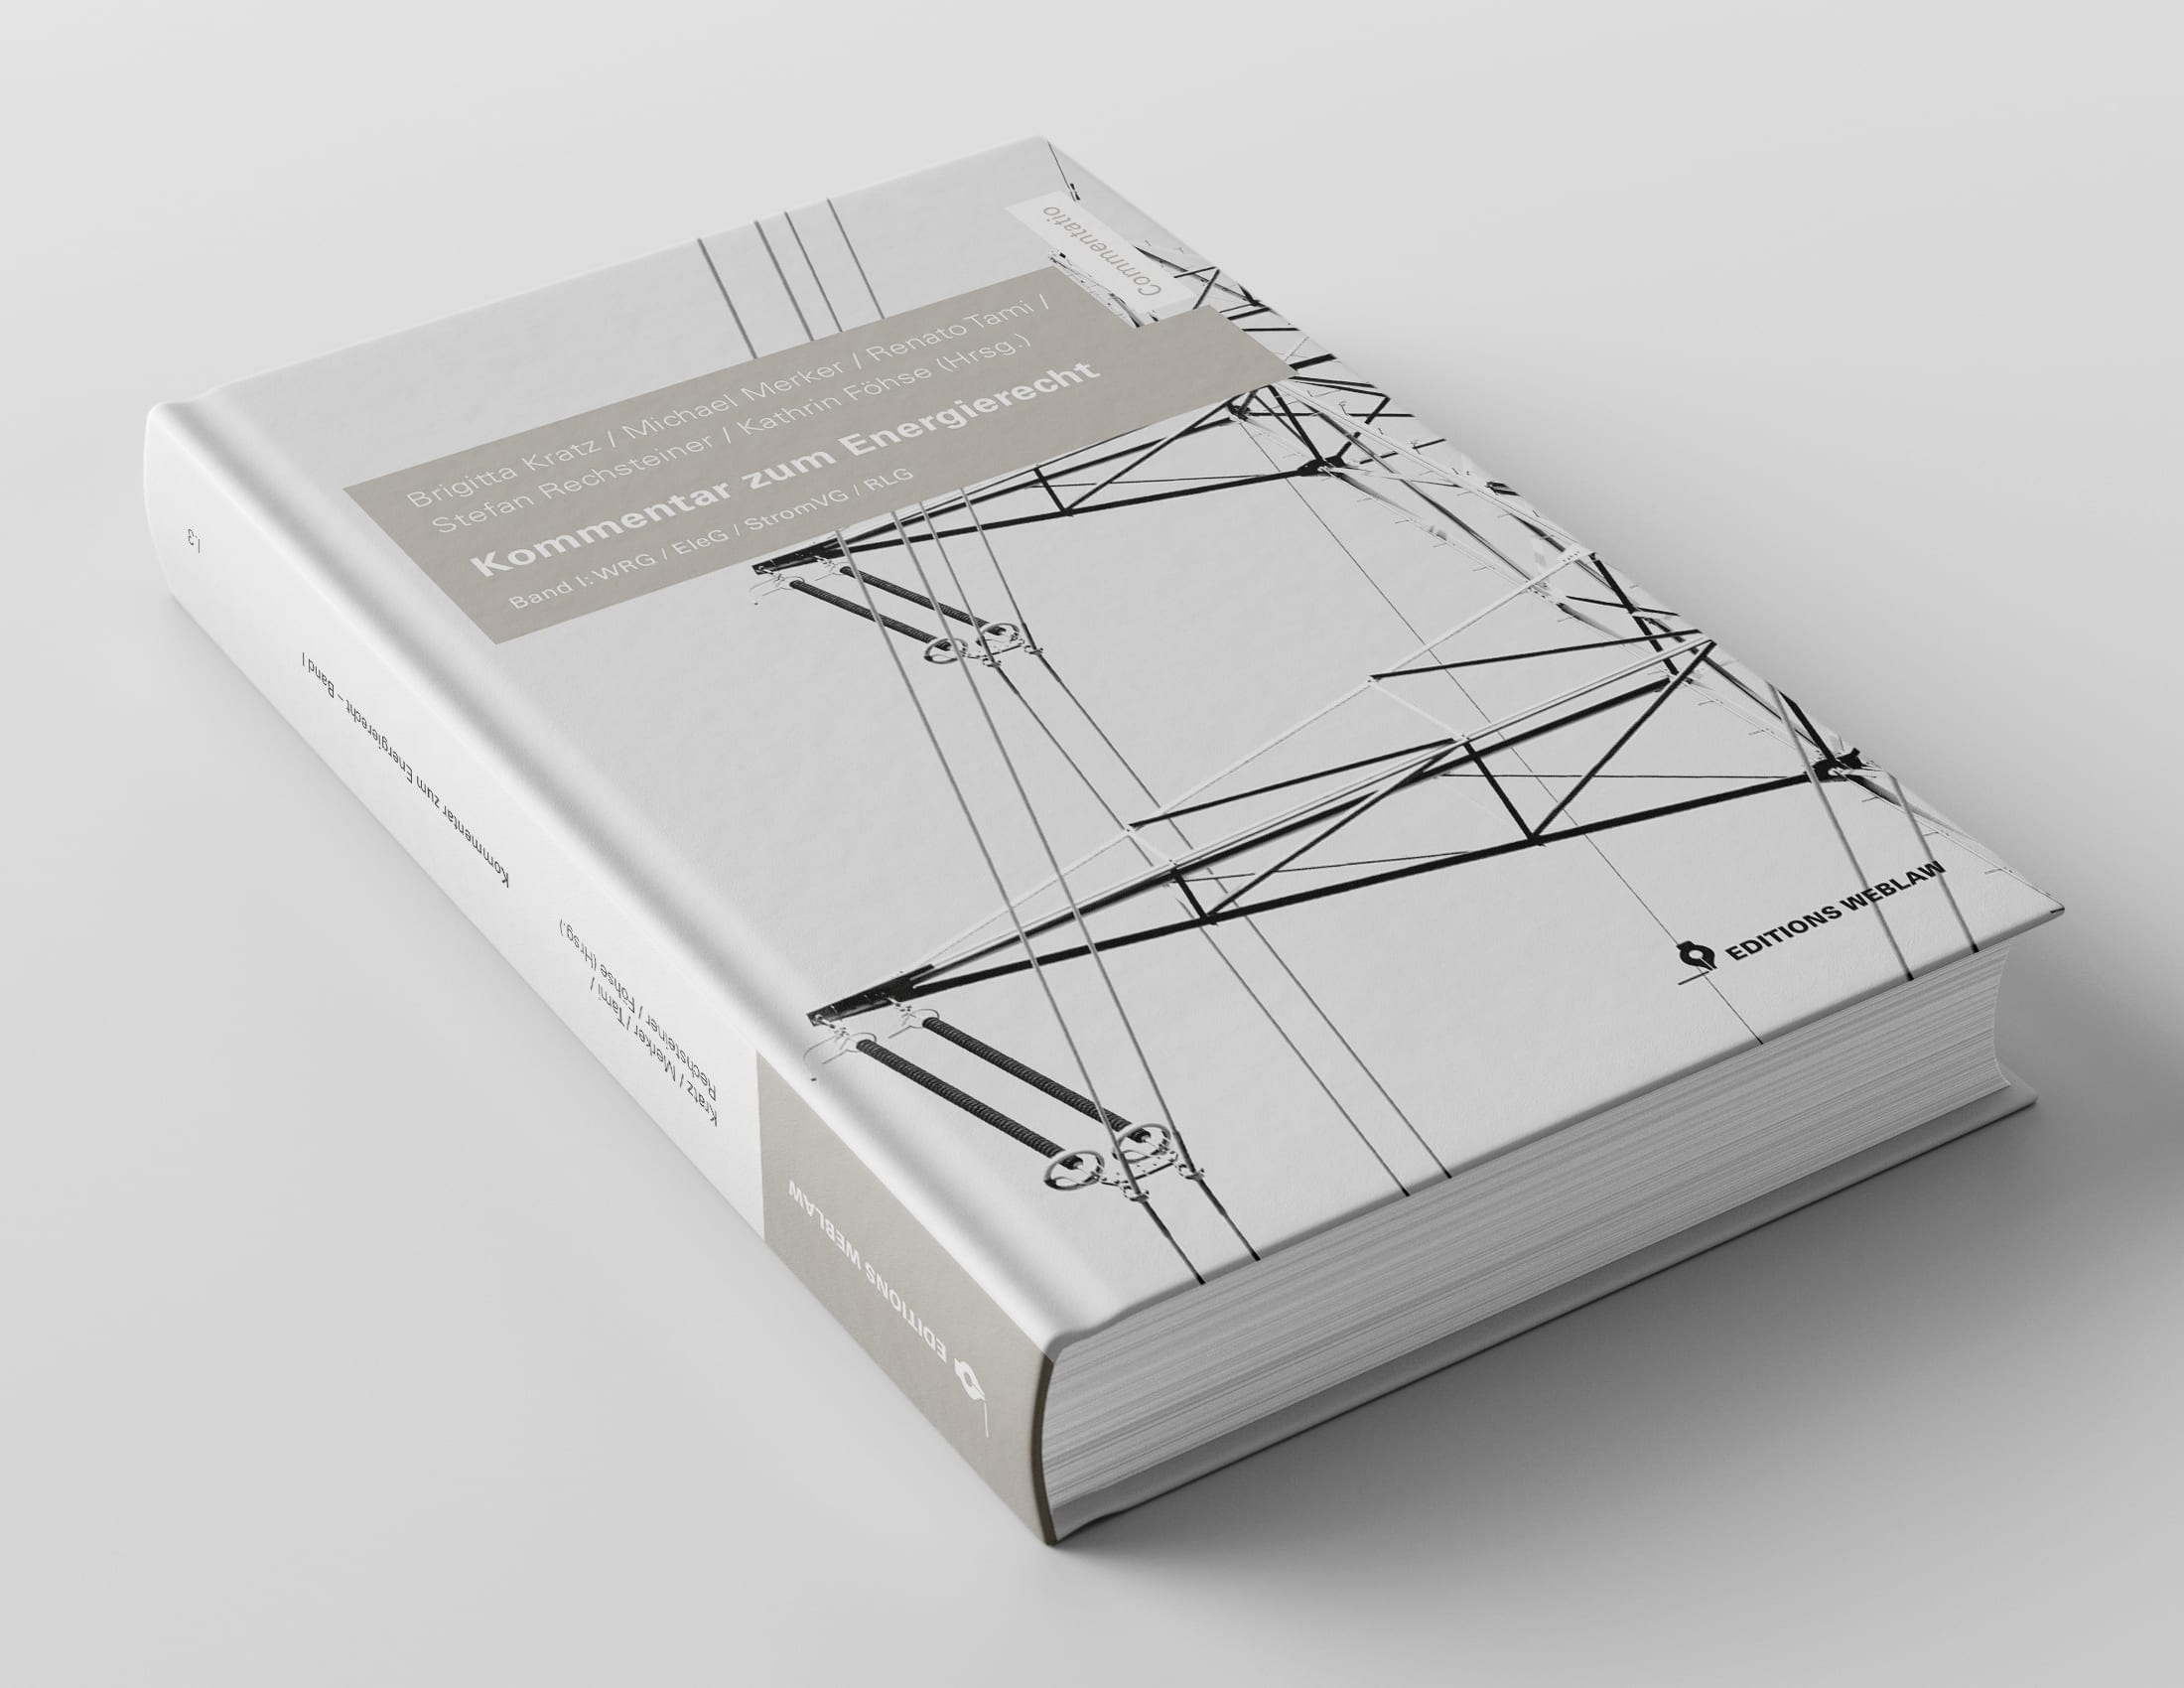 Photo of the book. The image on the cover represents an electric pylon.